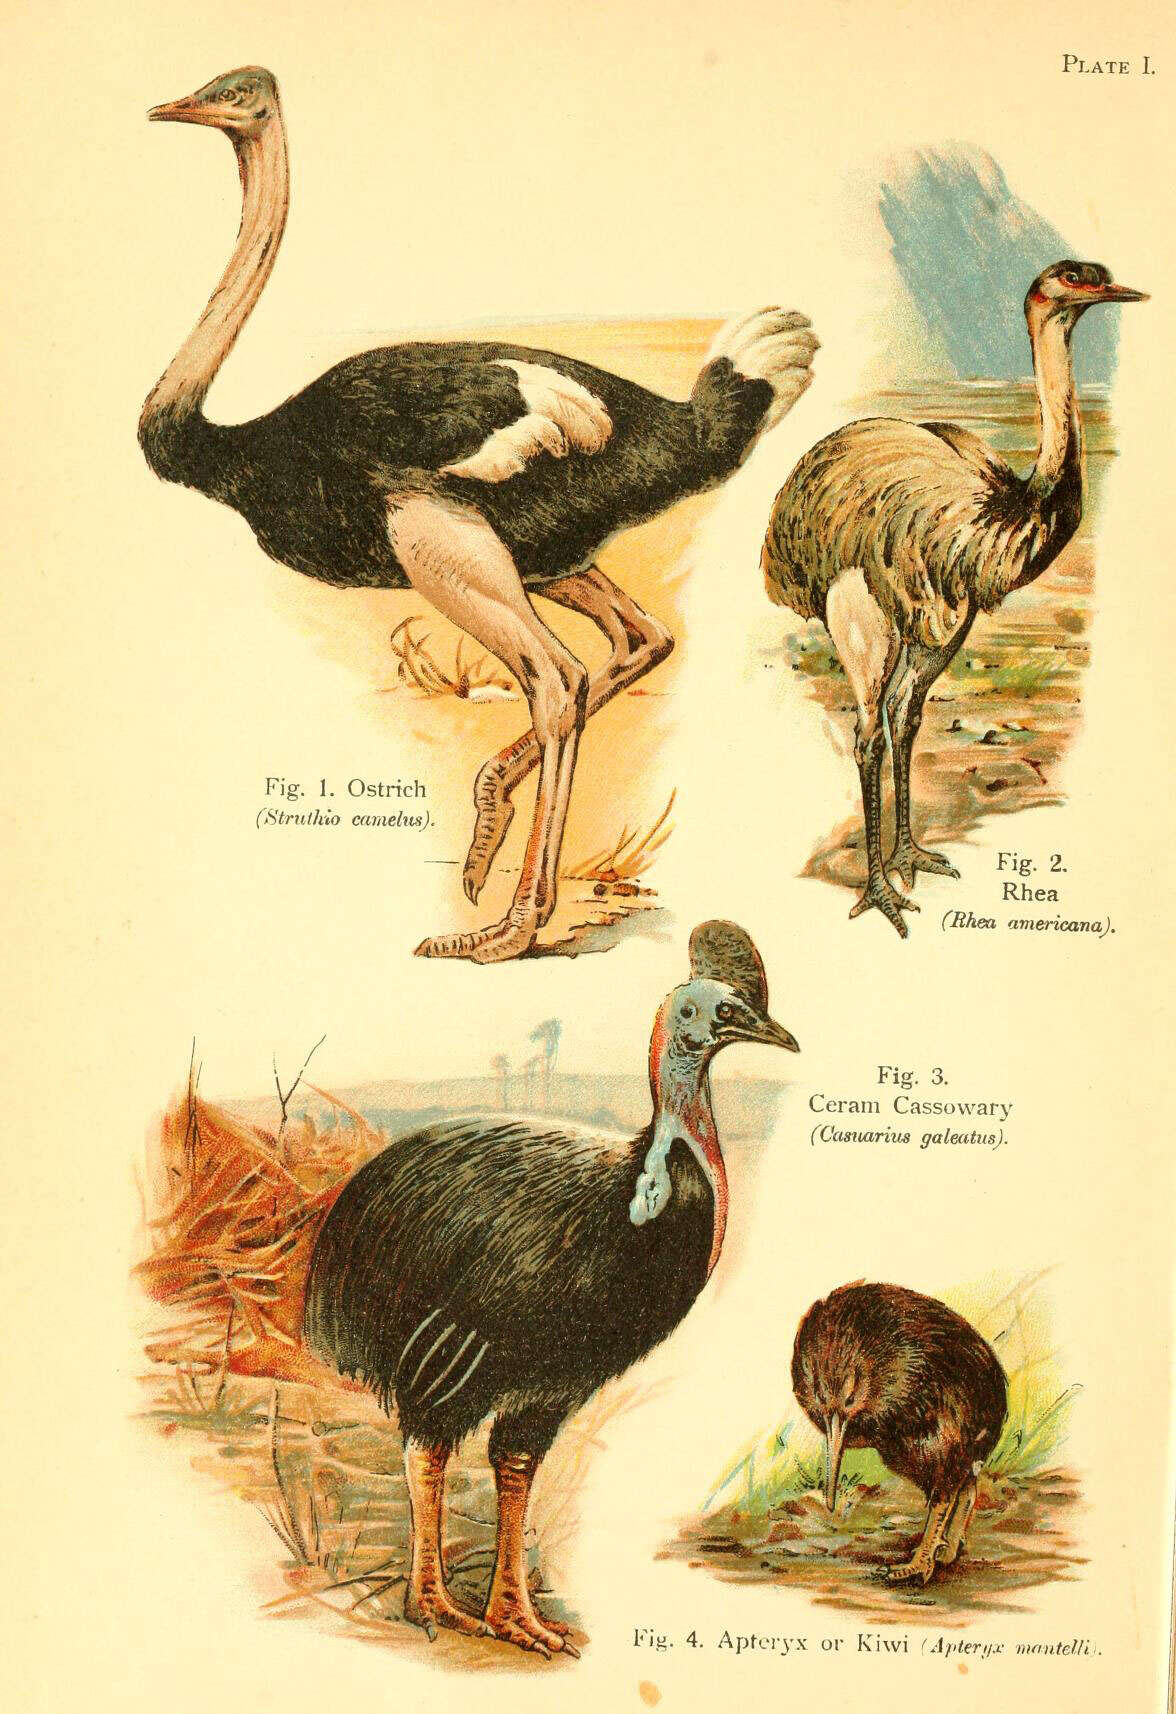 Image of ostriches